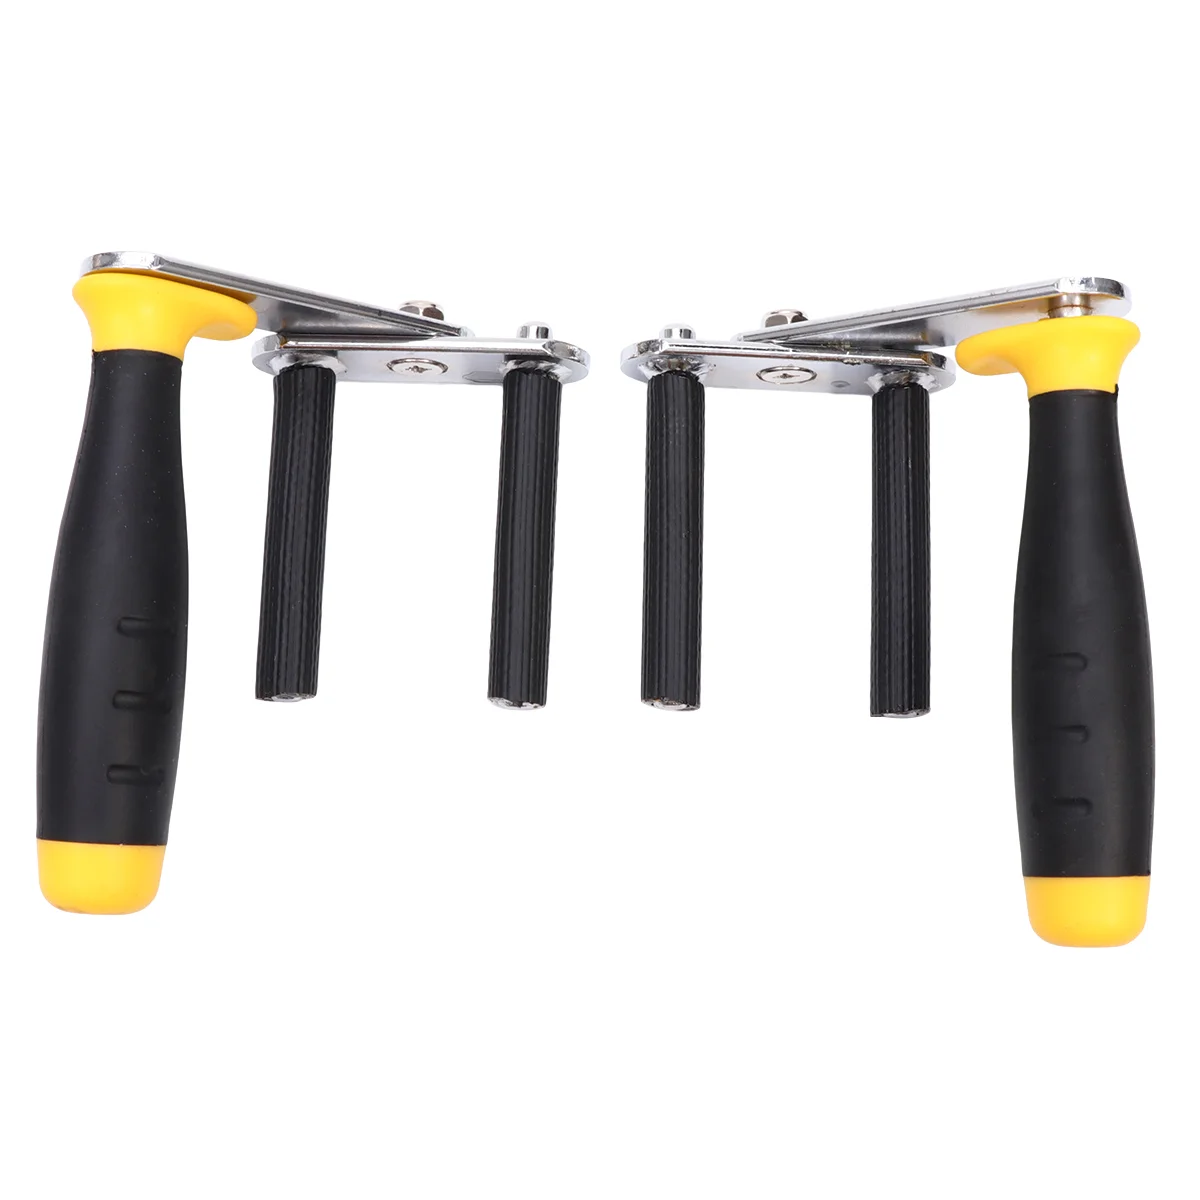 

1 Pair Drywall Tools Carrier Portable Gypsum Board Lifter Handle Carry Load Lifter for Plywood Panel Plasterboard Glass Board